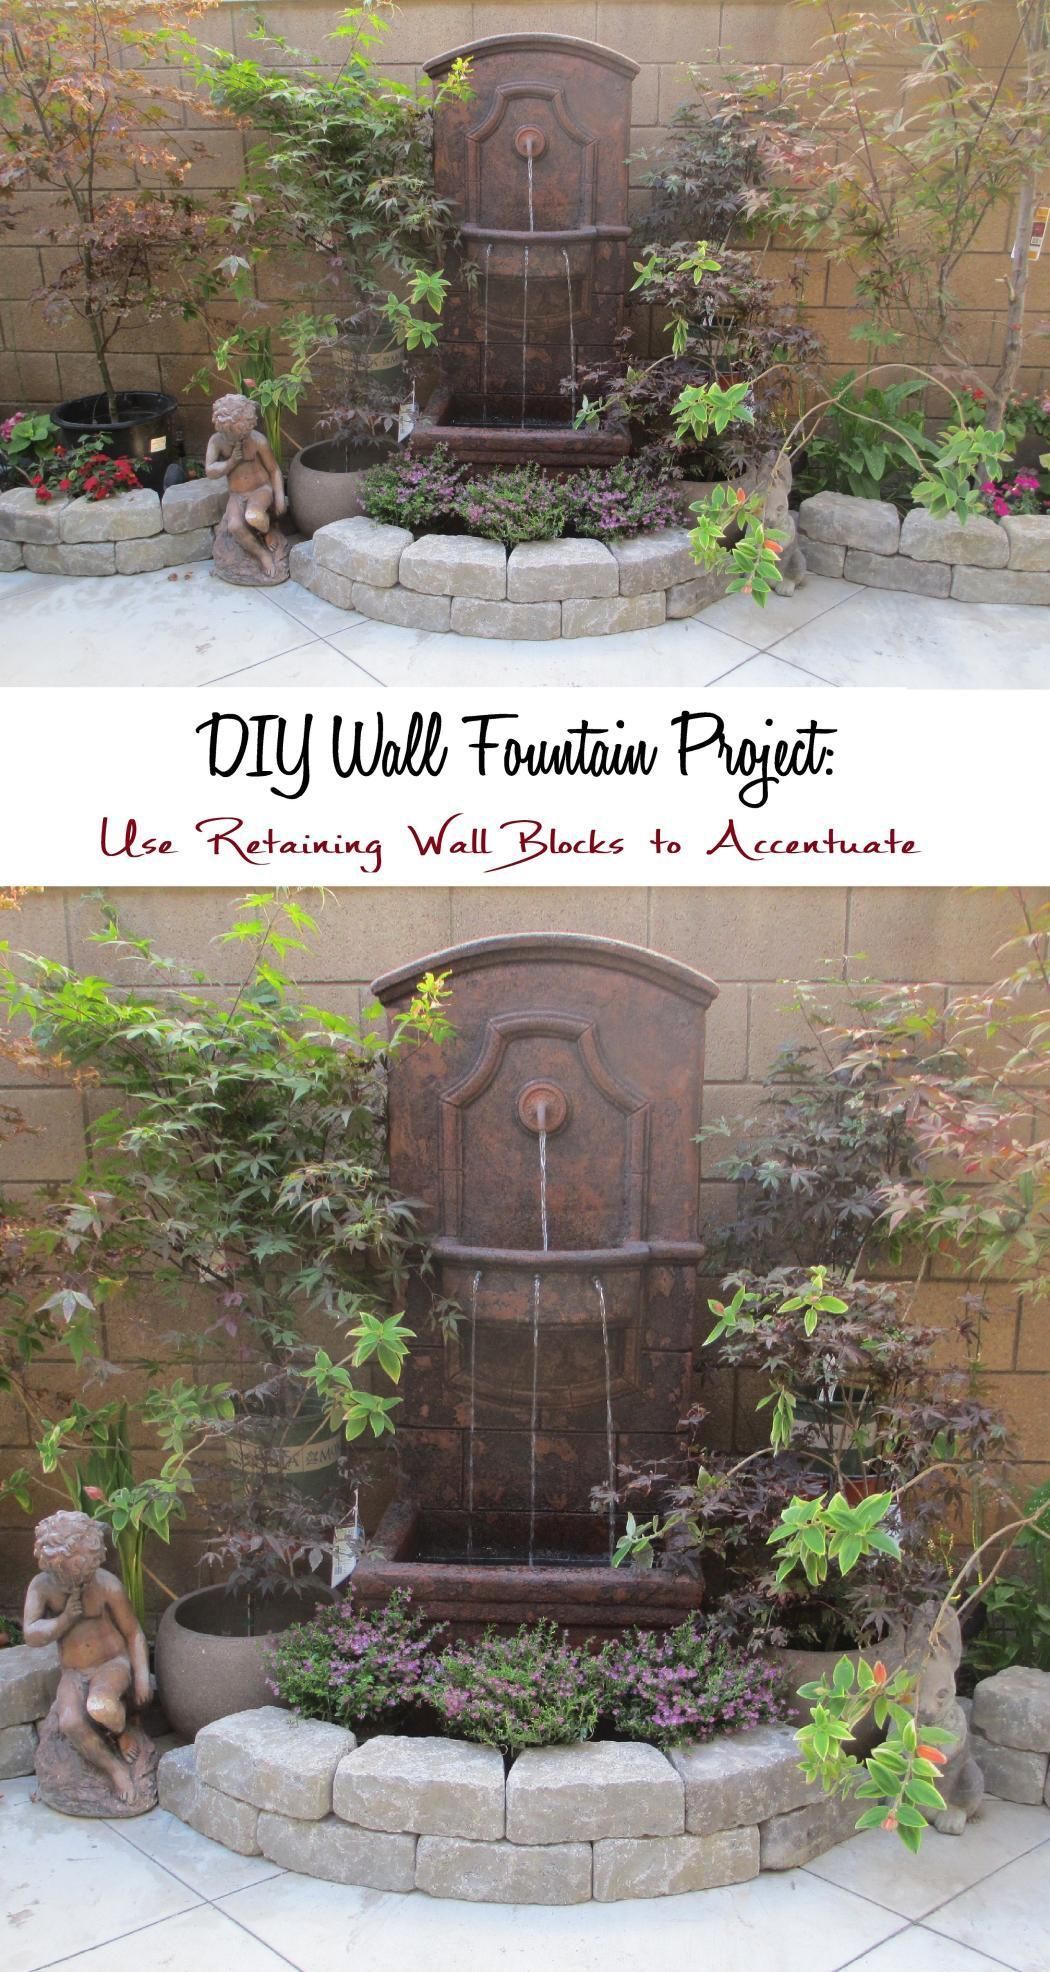 Garden : Japanese Maples Courtyard Garden with Wall Fountain: DIY Wall Fountain Project with Retaining Wall Blocks –